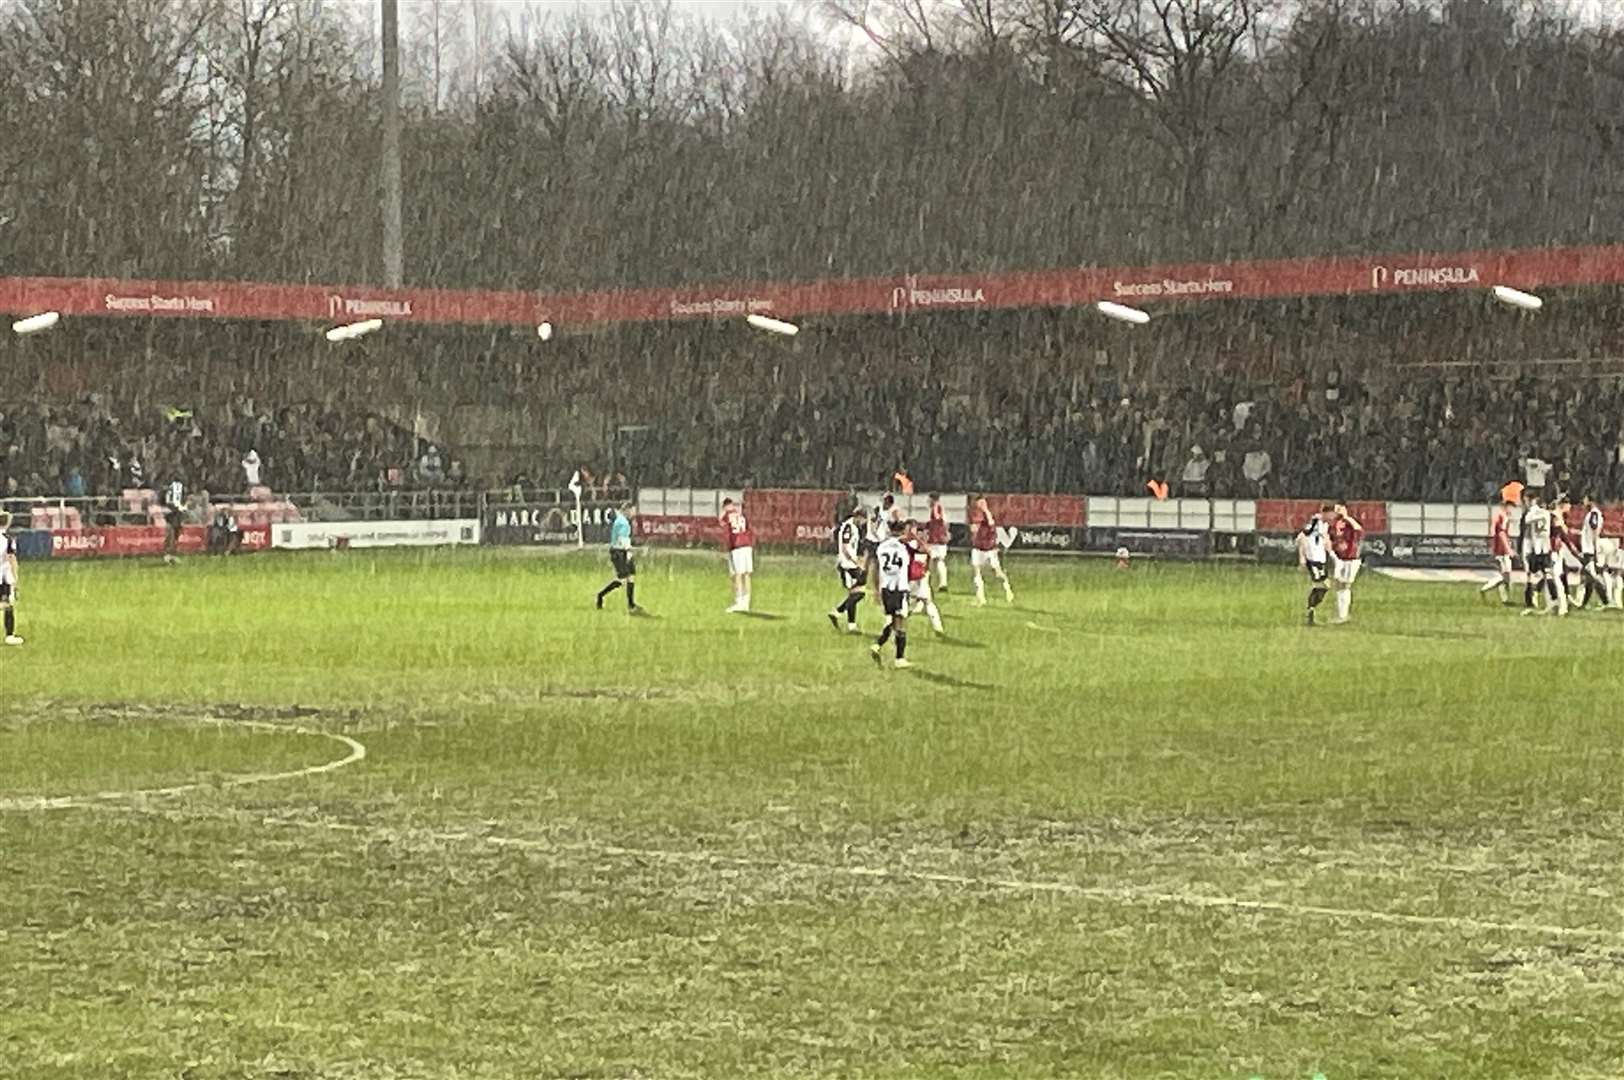 Conditions went from bad to worse on Saturday at Salford